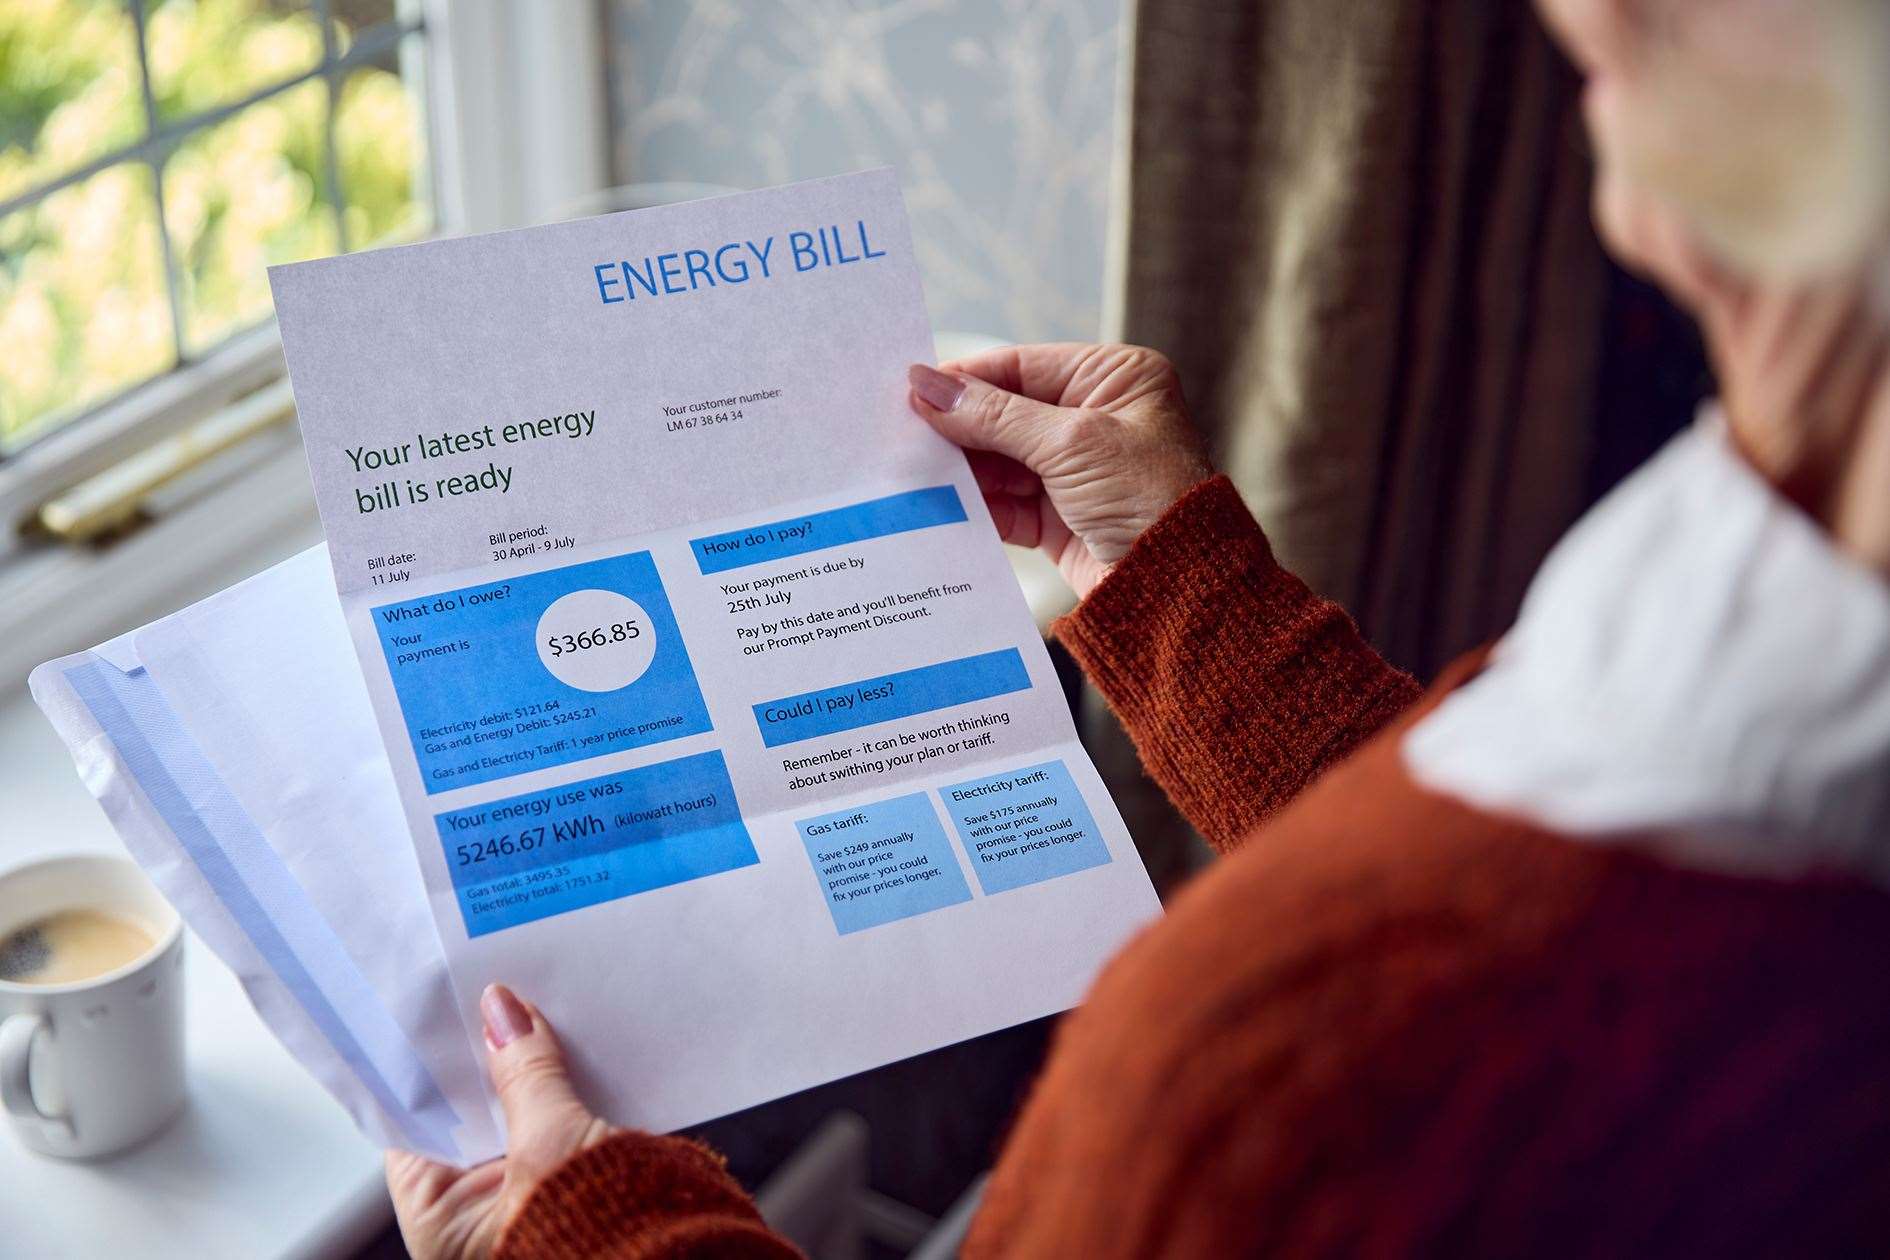 Our energy bills can be higher than elsewhere.